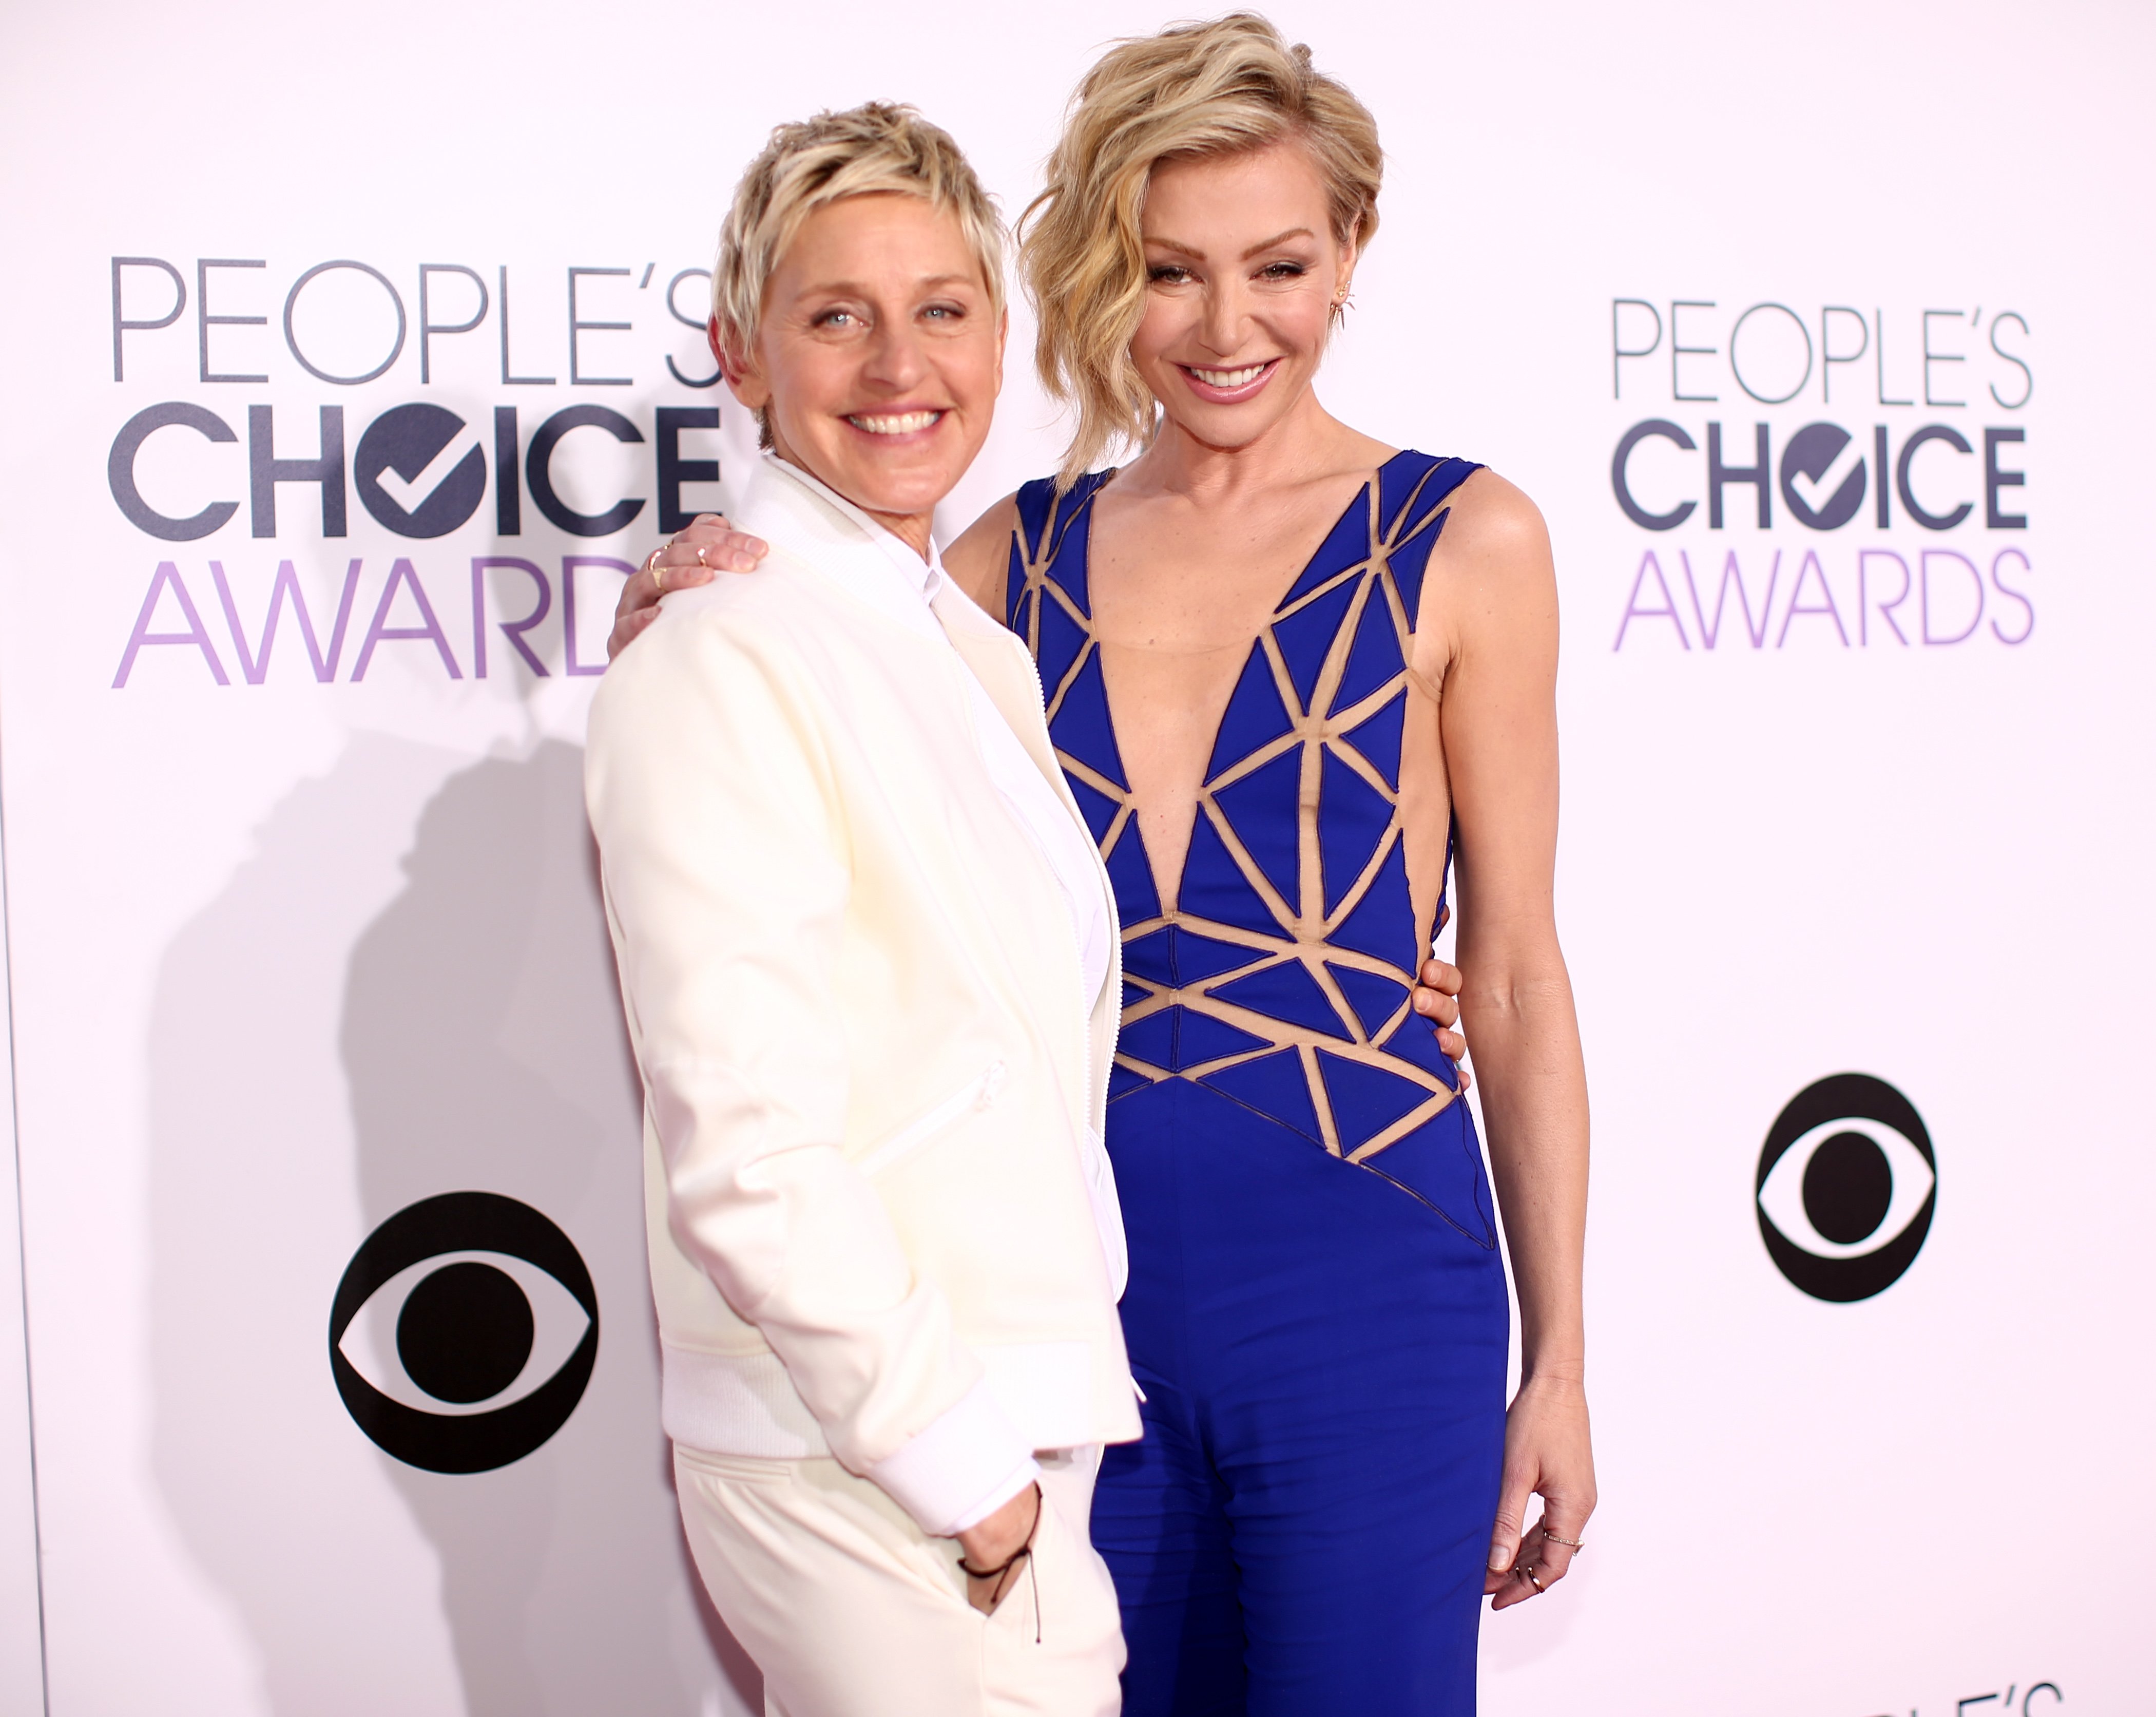 Ellen DeGeneres and Portia de Rossi attend The 41st Annual People's Choice Awards on January 7, 2015 in Los Angeles, California. I Source: Getty Images 